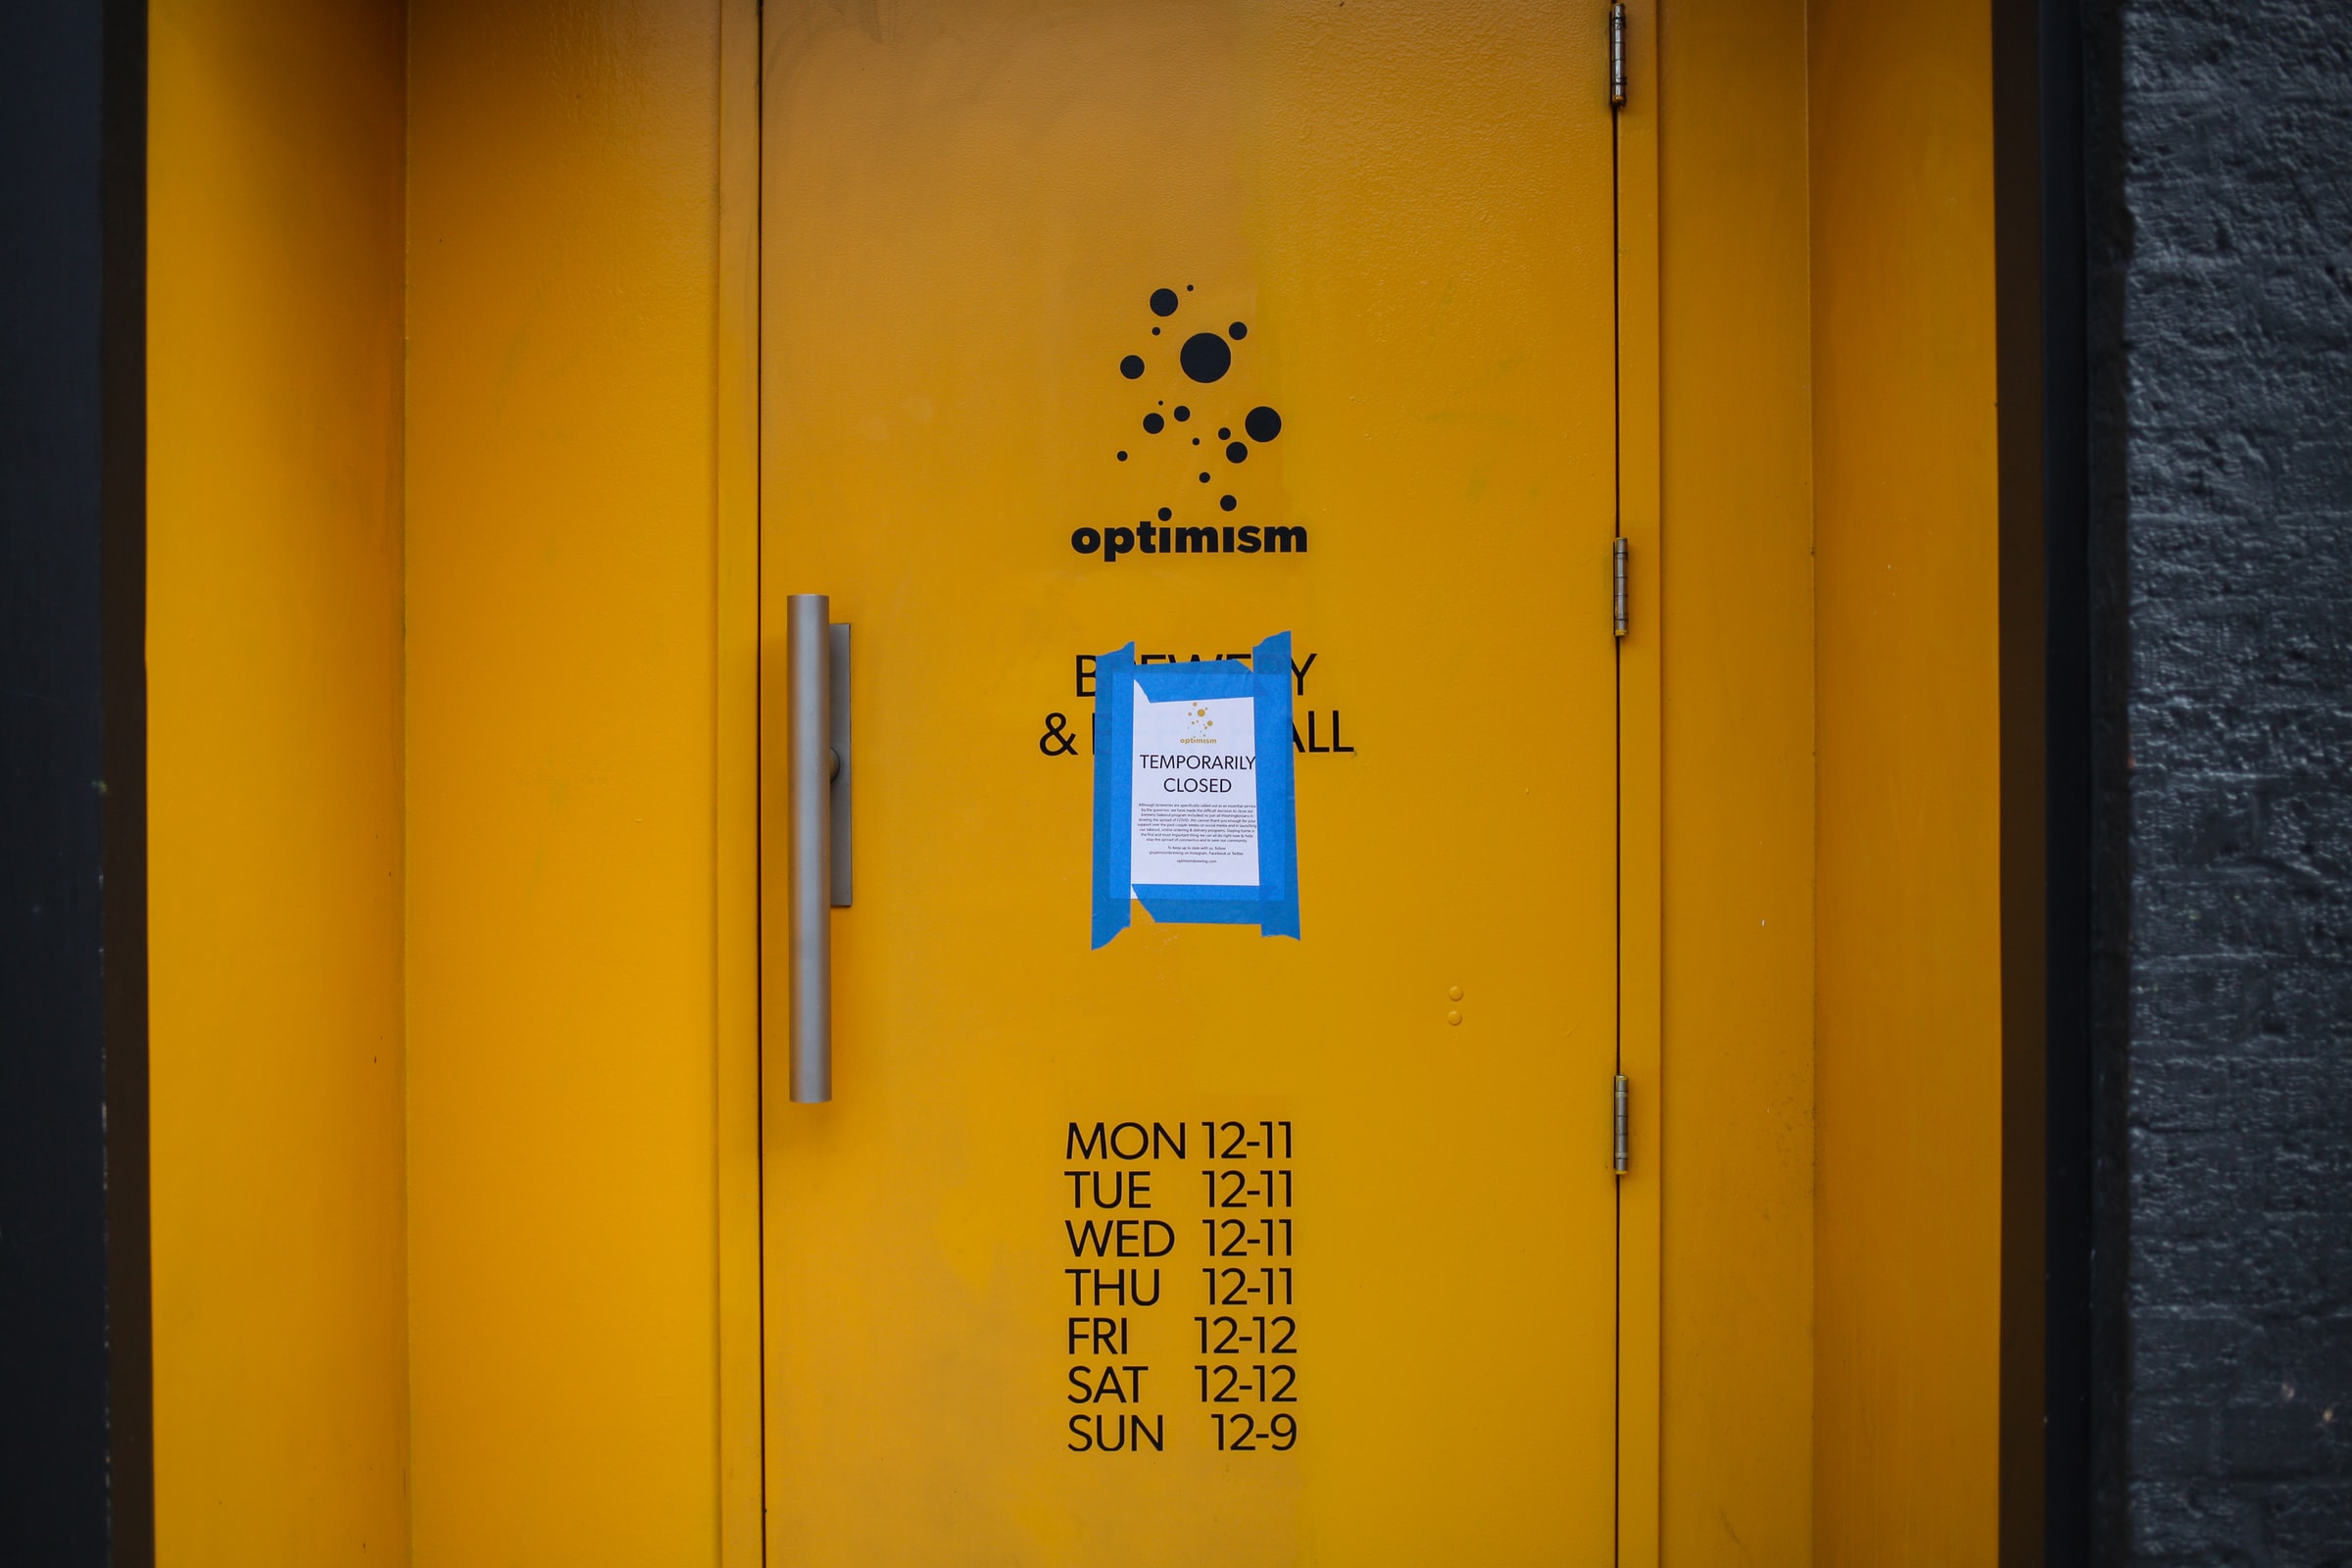 Photo of the bright yellow industrial front doors of a business which has been closed due to the pandemic of 2020. The business name appears to be Optimism, and there is a printed paper sign taped to the door beneath the name of the establishment, which says "Temporarily Closed." At the bottom of the door are the hours of operation for the business. 